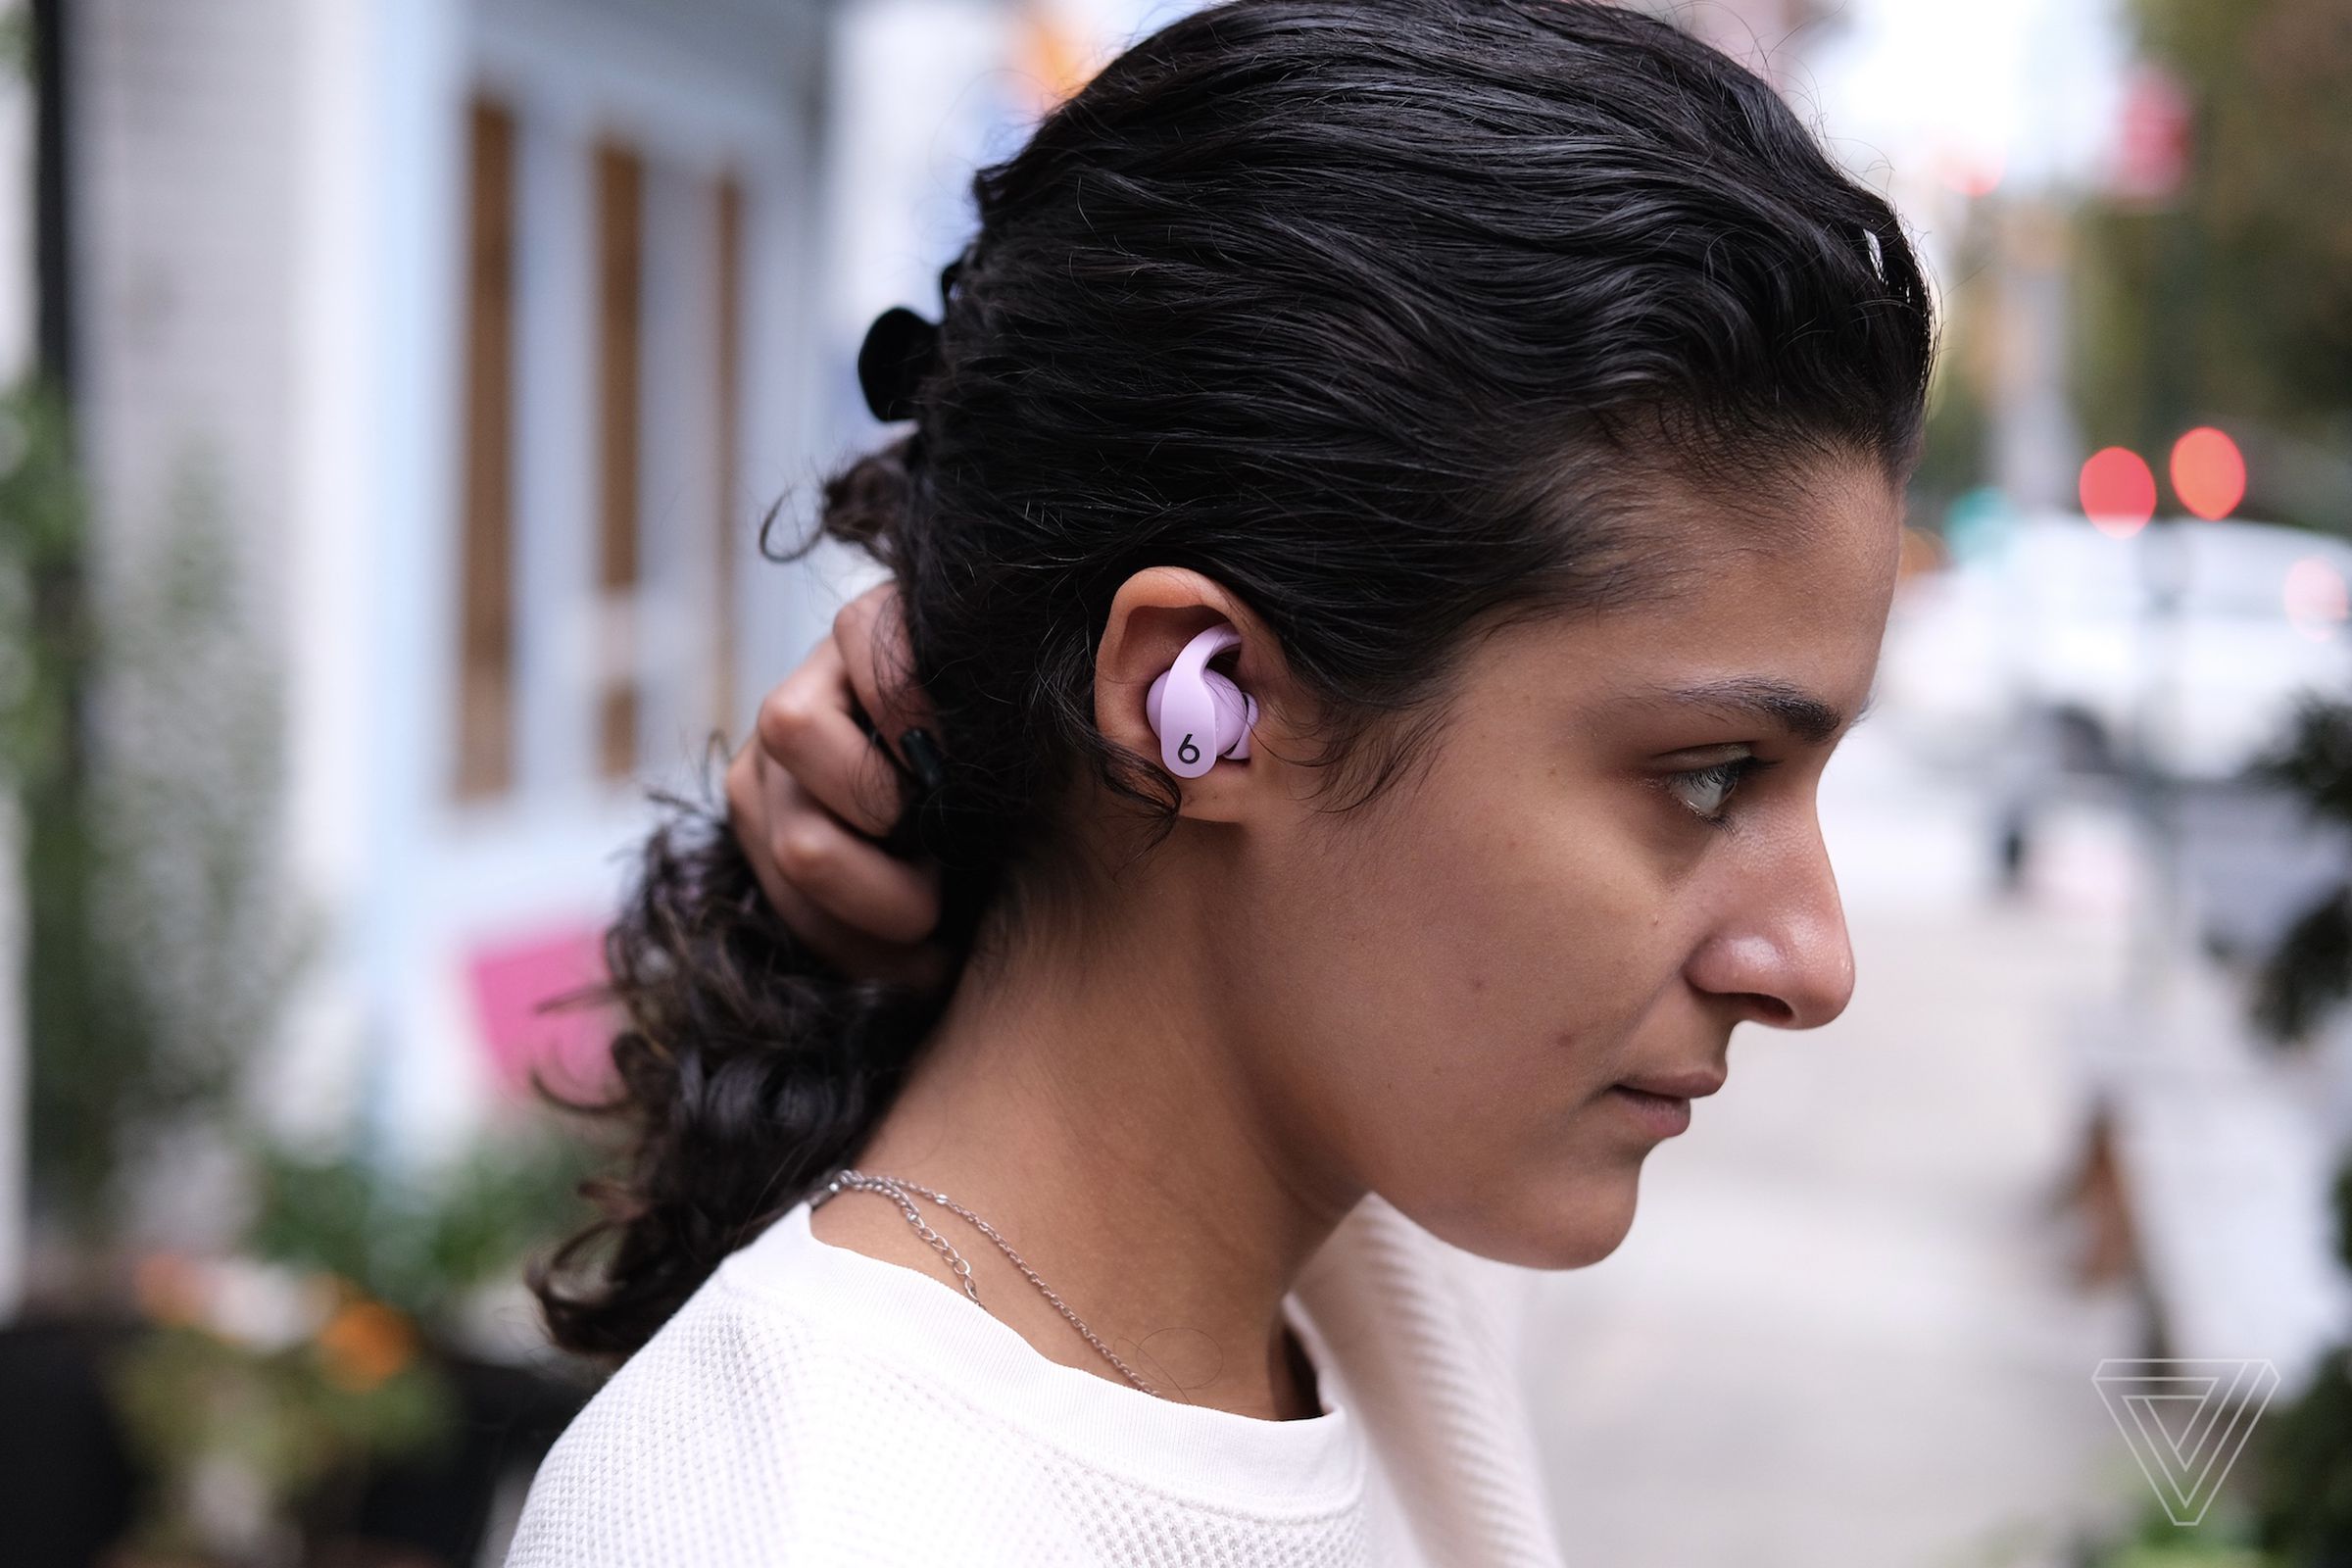 A side-profile image of the Beats Fit Pro earbuds pictured in a woman’s right ear.